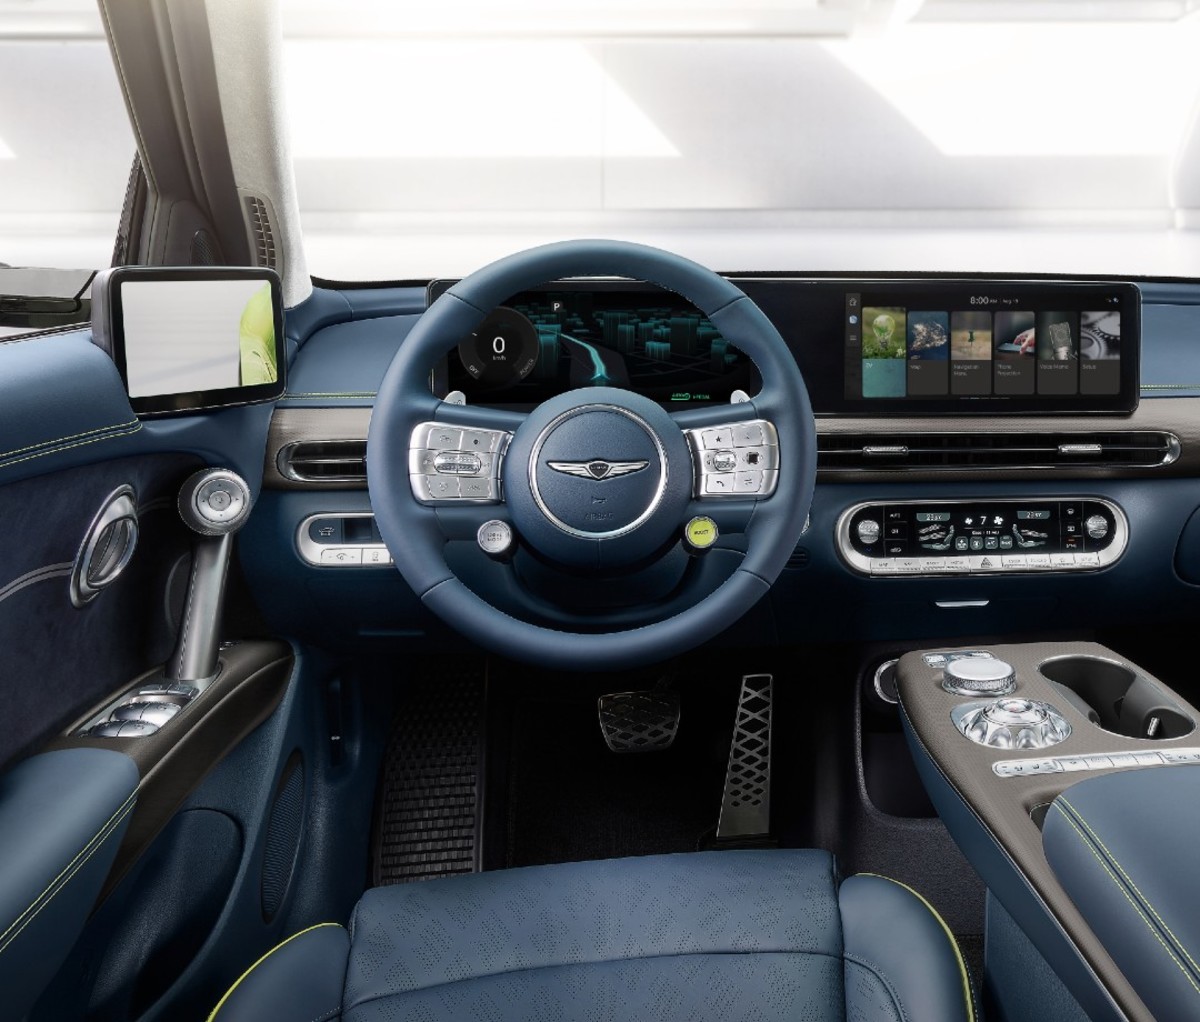 Driver's side interior of the Genesis GV60